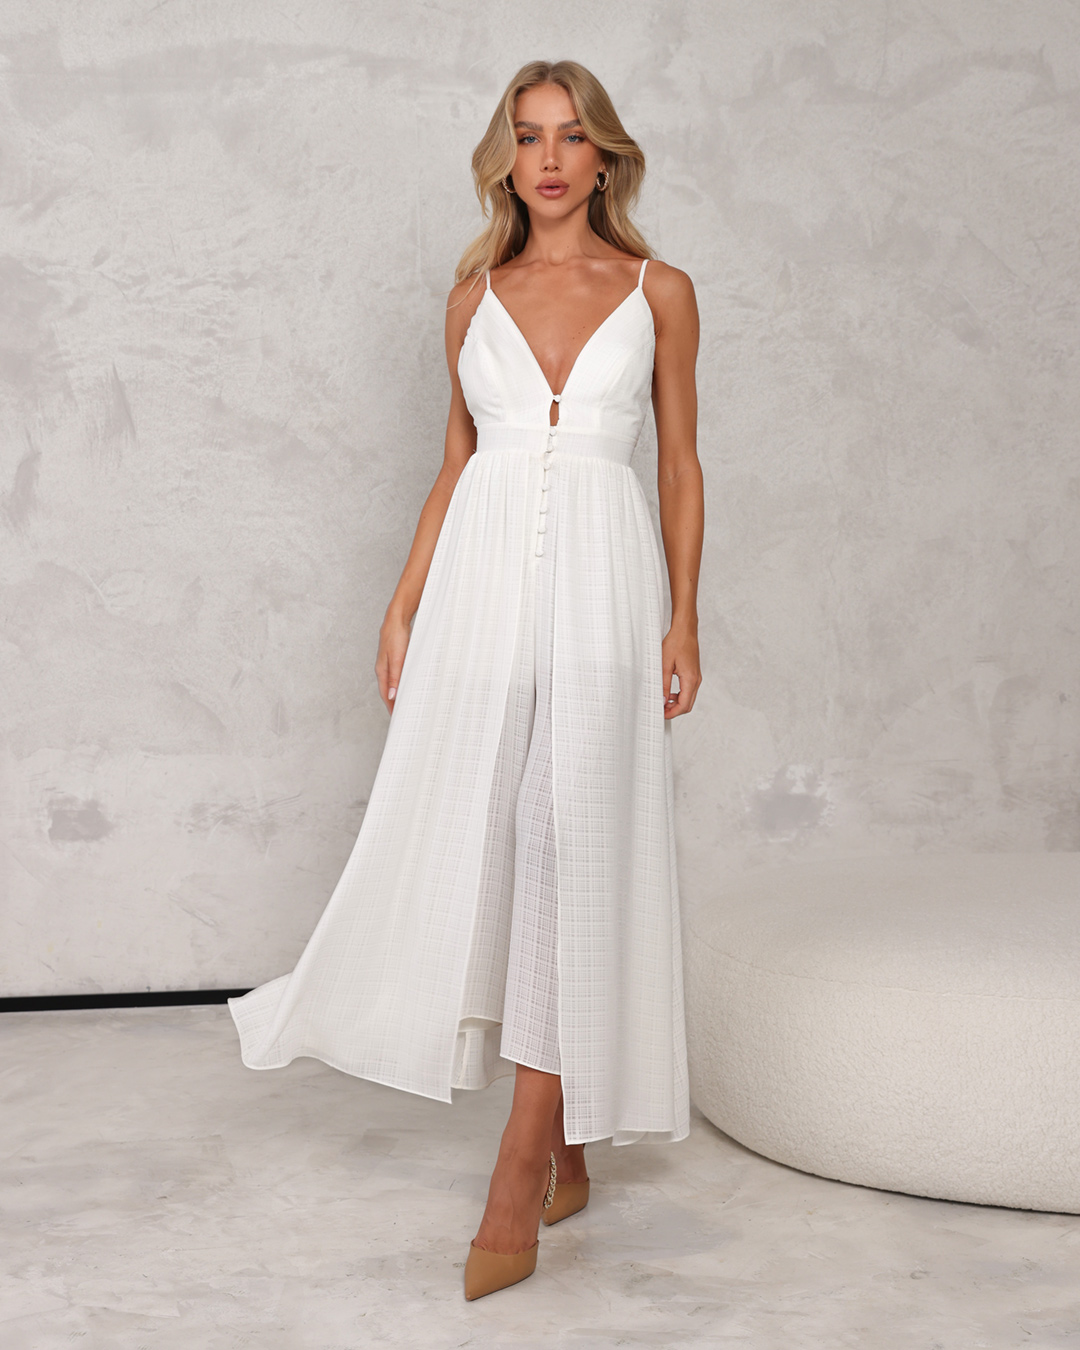 Dot Clothing - Dress Jumpsuit Dot Clothing Offwhite - 2261OFF